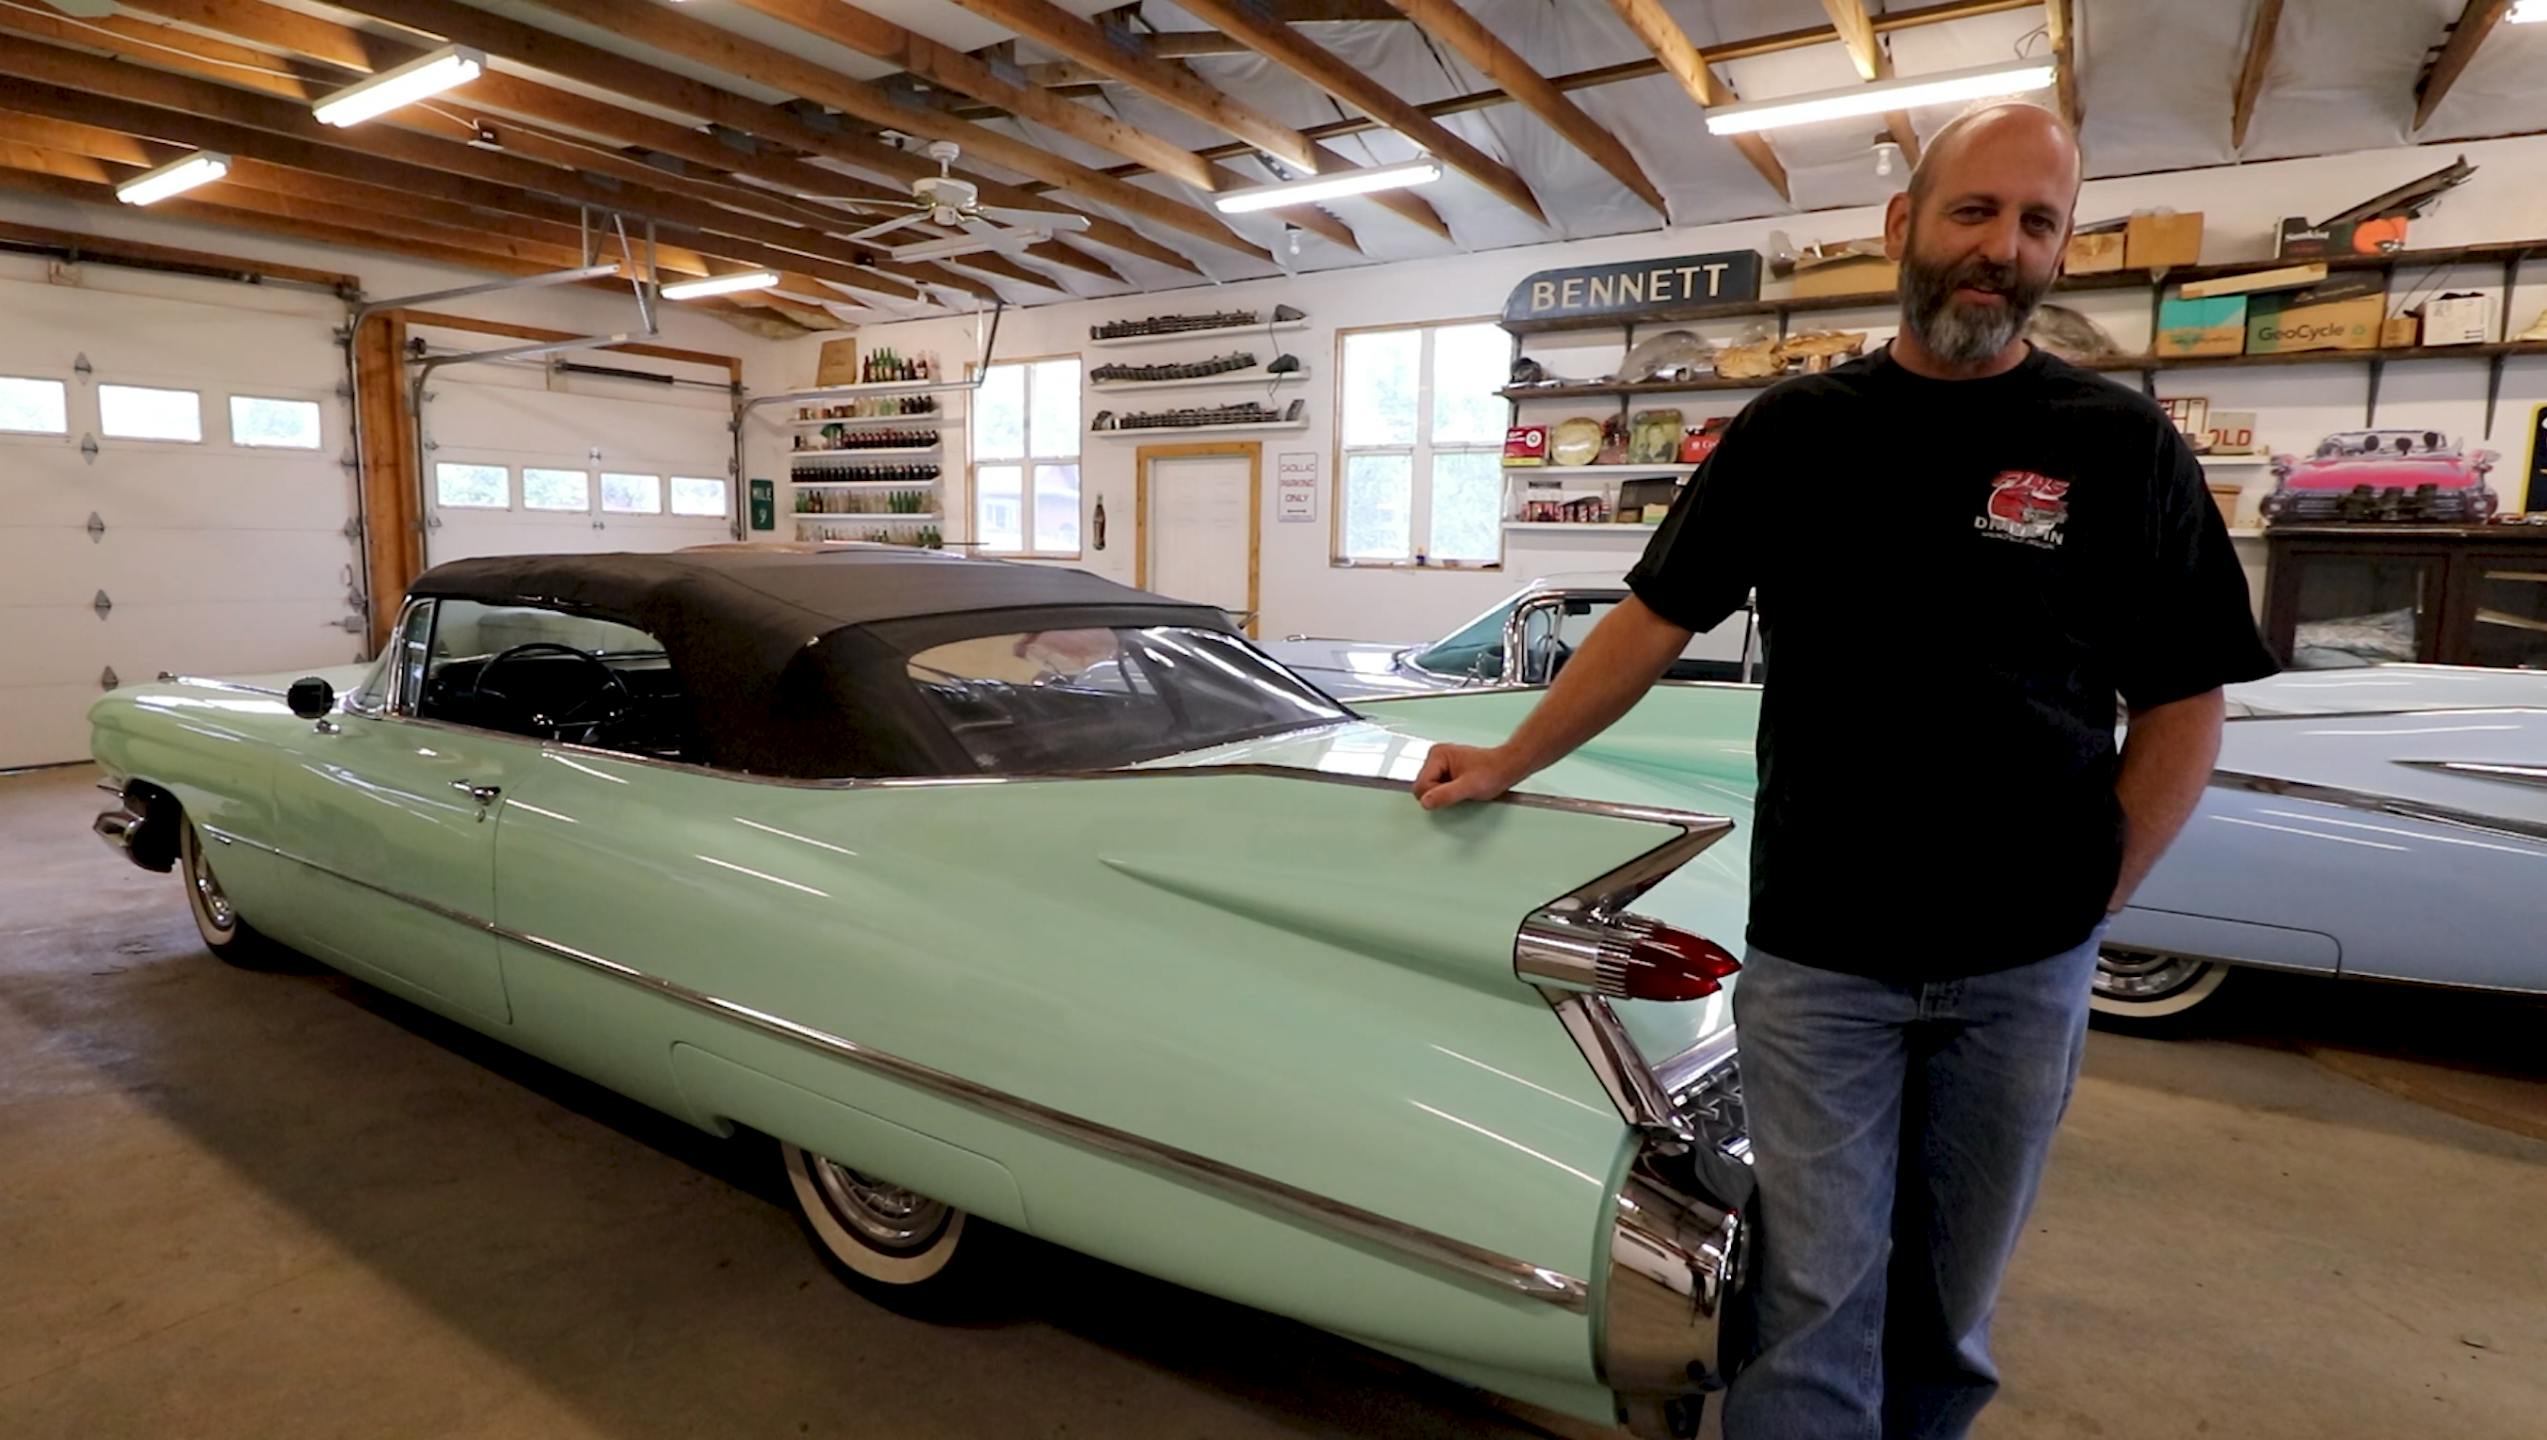 Dan Morehouse with old vintage cadillac in garage